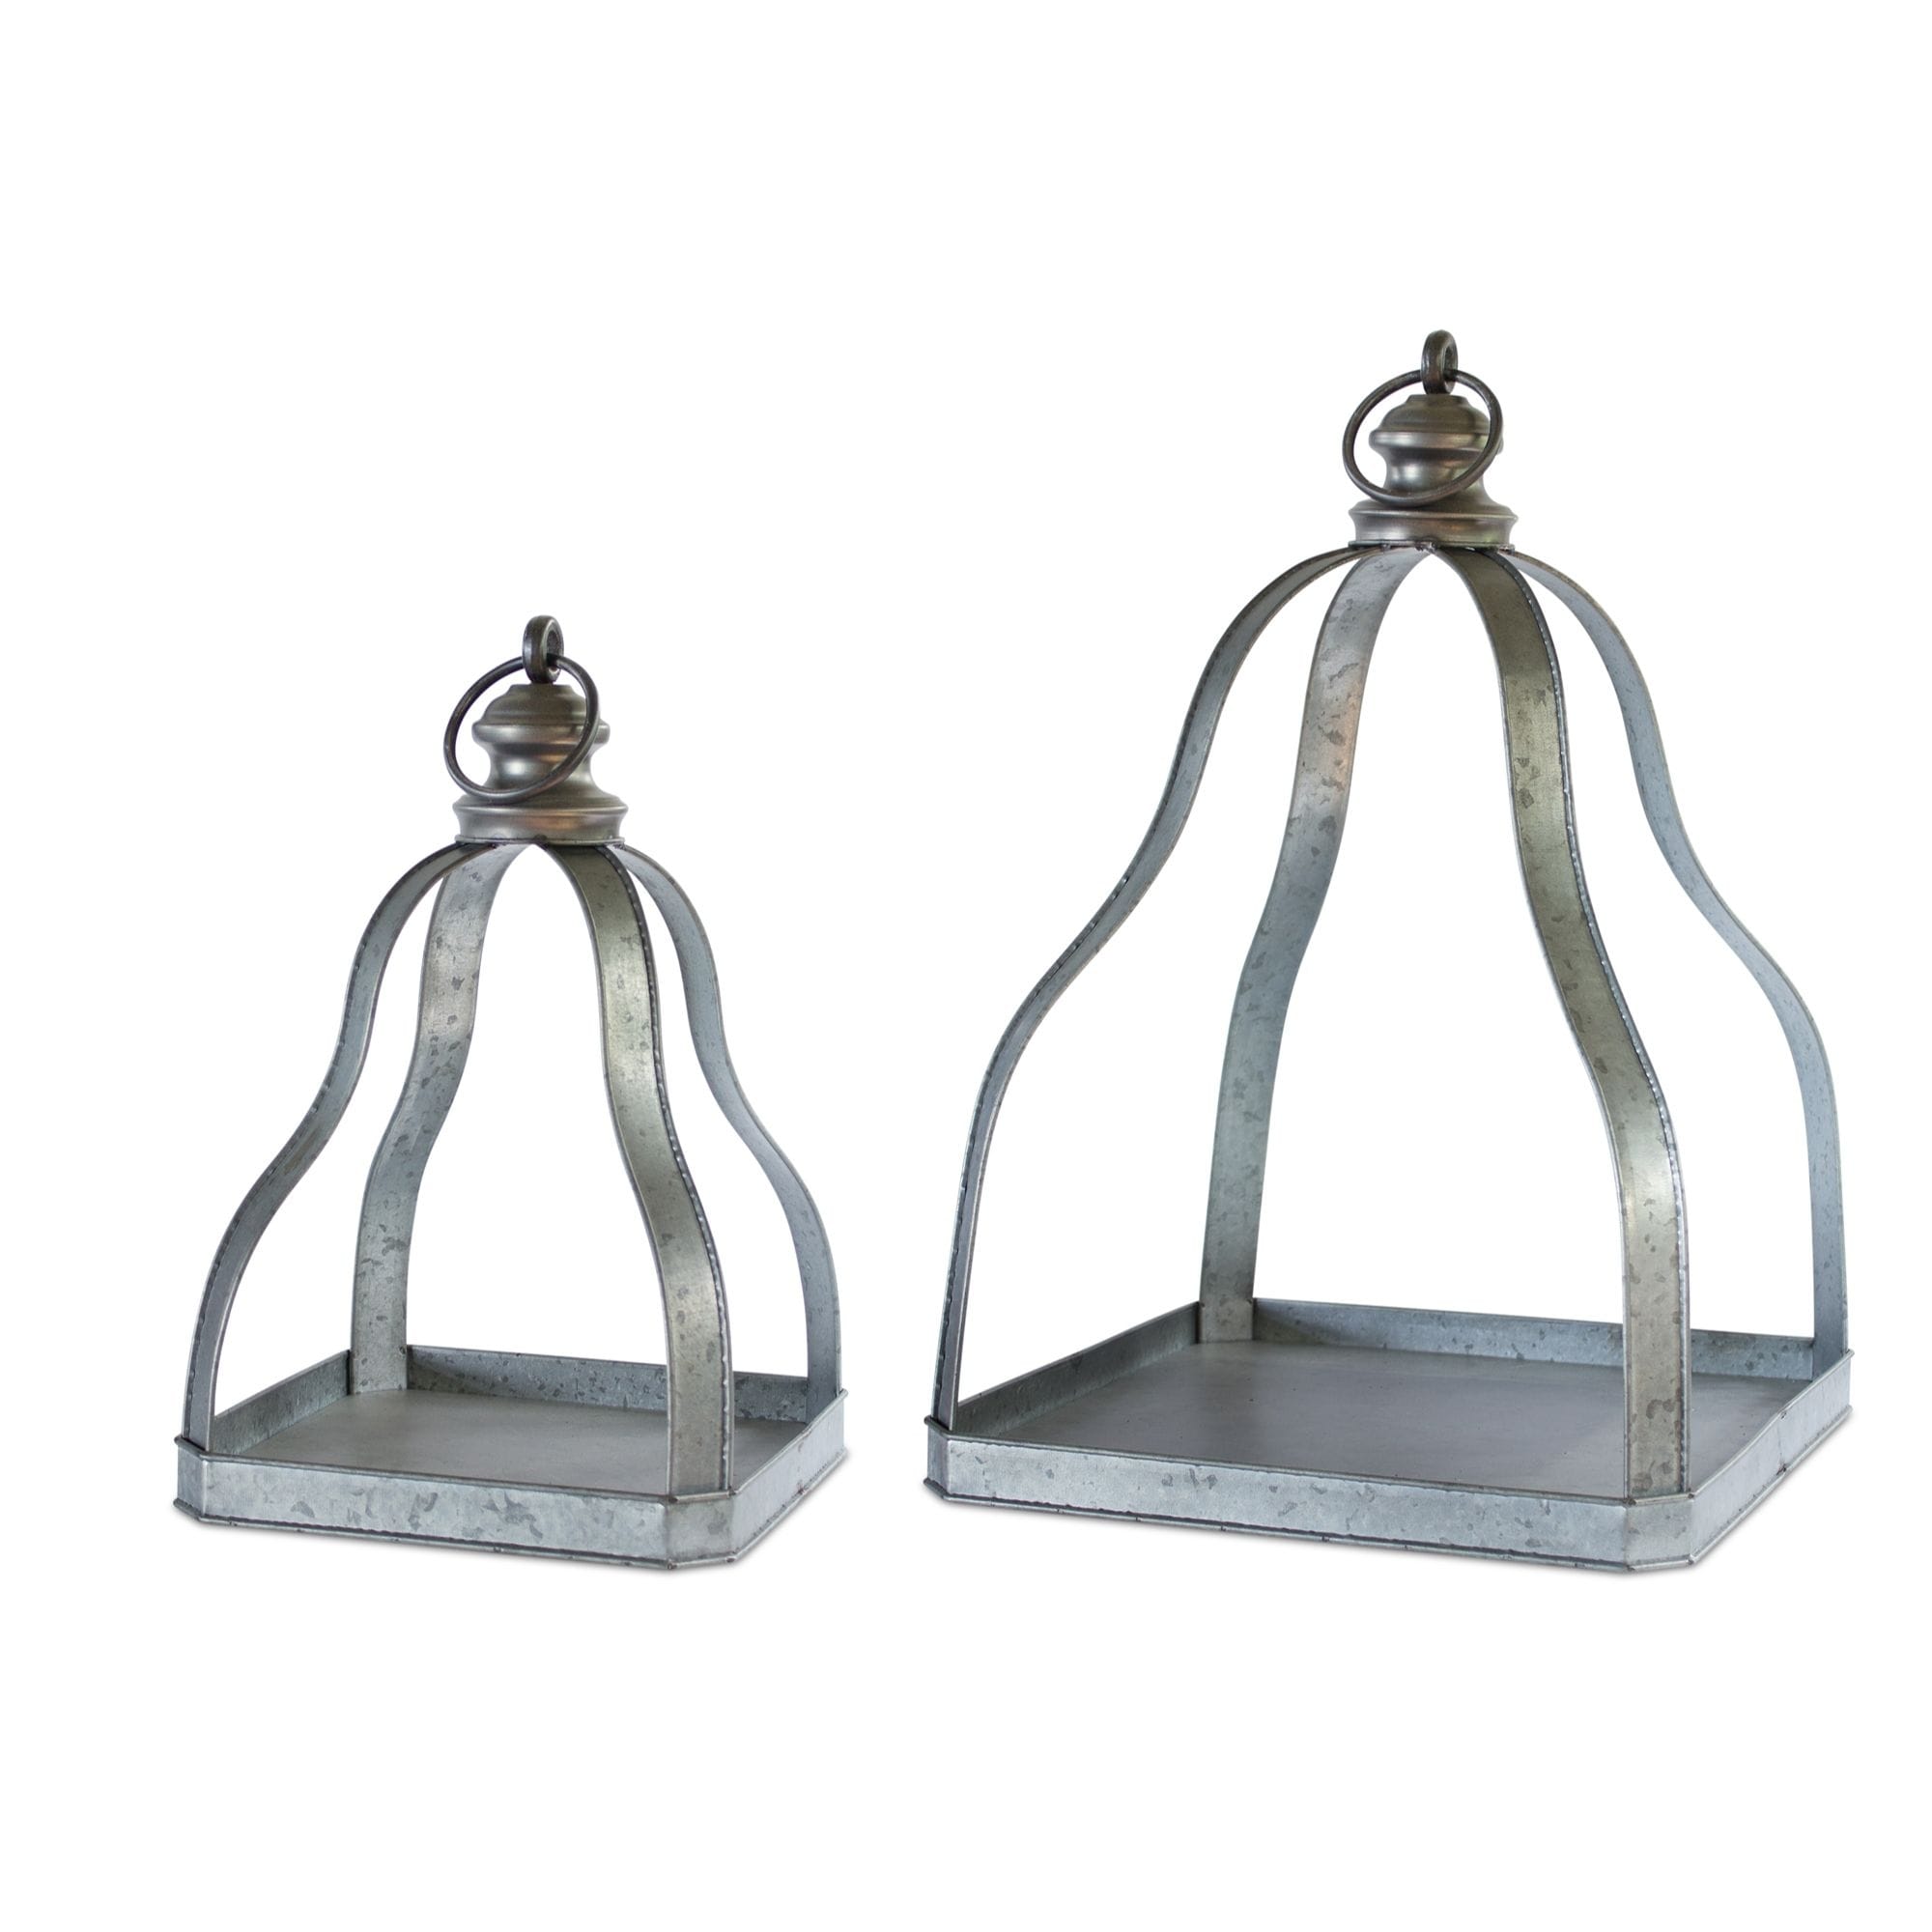 https://ak1.ostkcdn.com/images/products/is/images/direct/f6d480533e1464ade146145f92c6022f97b6d5ac/Set-of-2-Gray-and-Black-Galvanized-Hanging-Open-Lantern-20%22.jpg